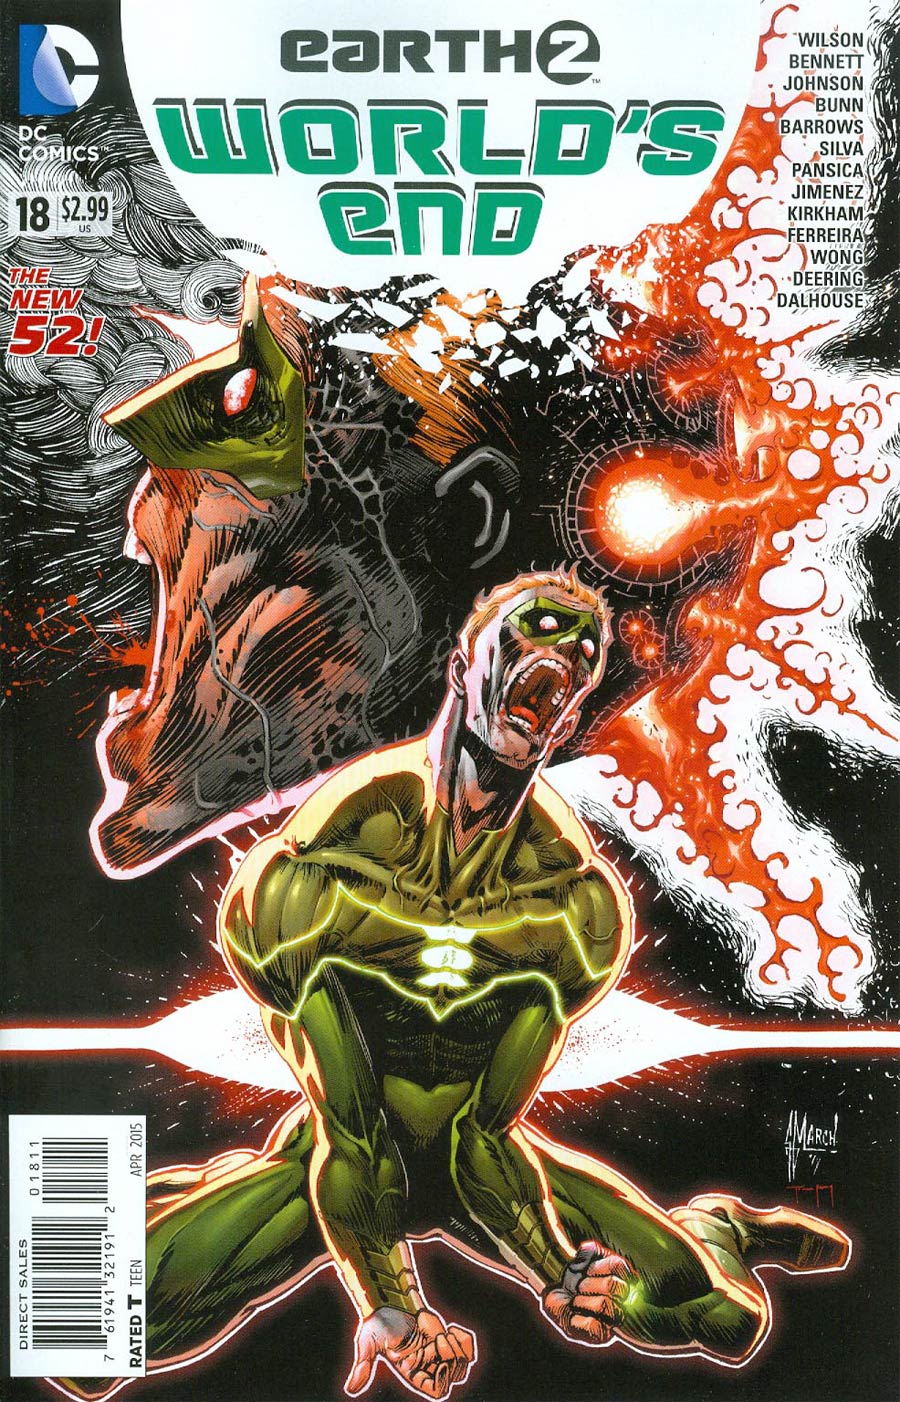 Earth 2 Worlds End #18